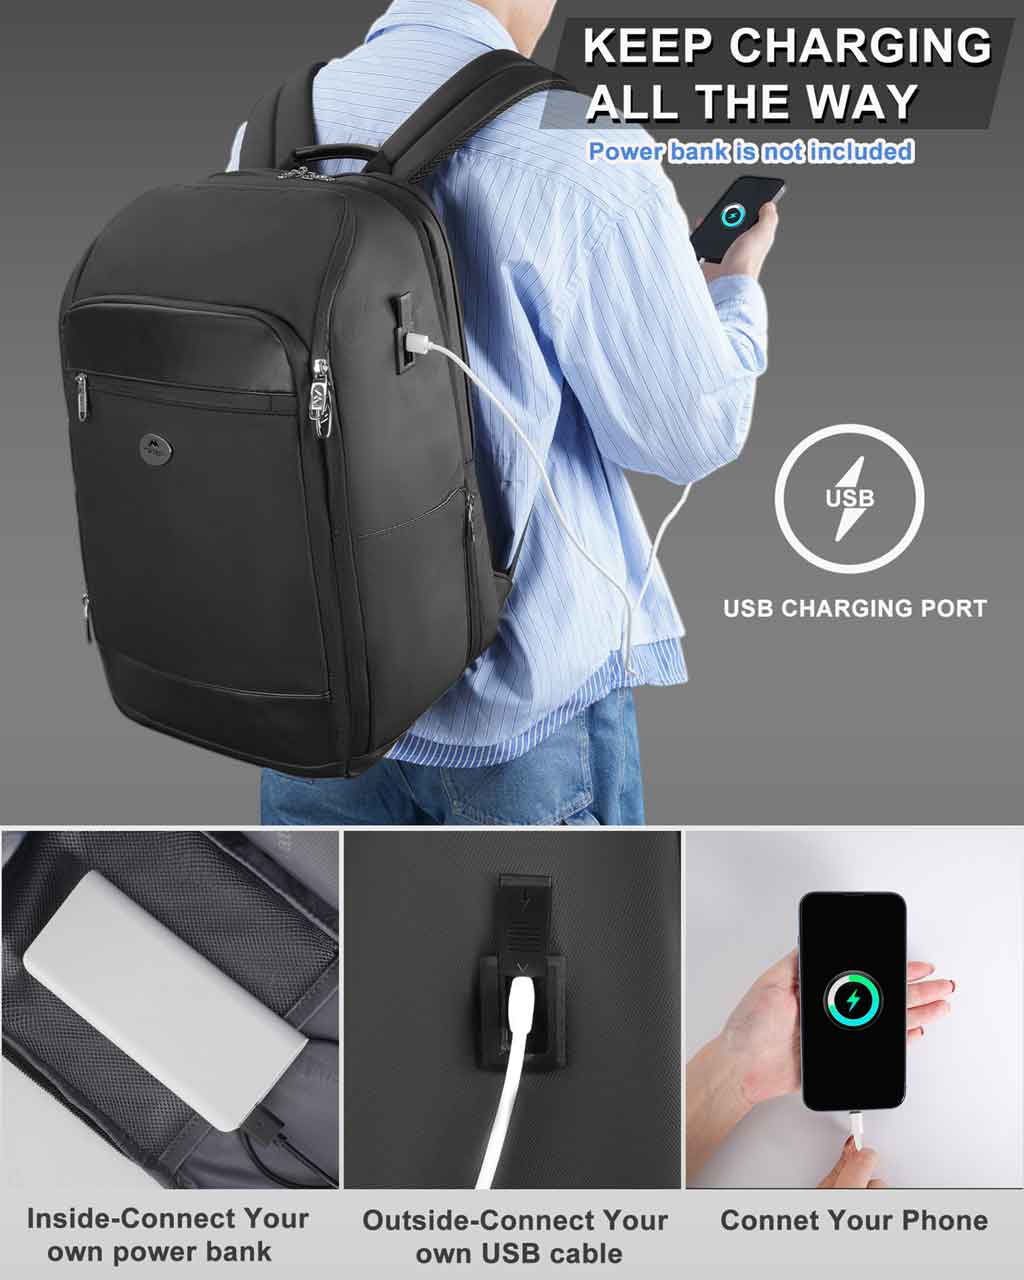 MATEIN Business Travel Backpack